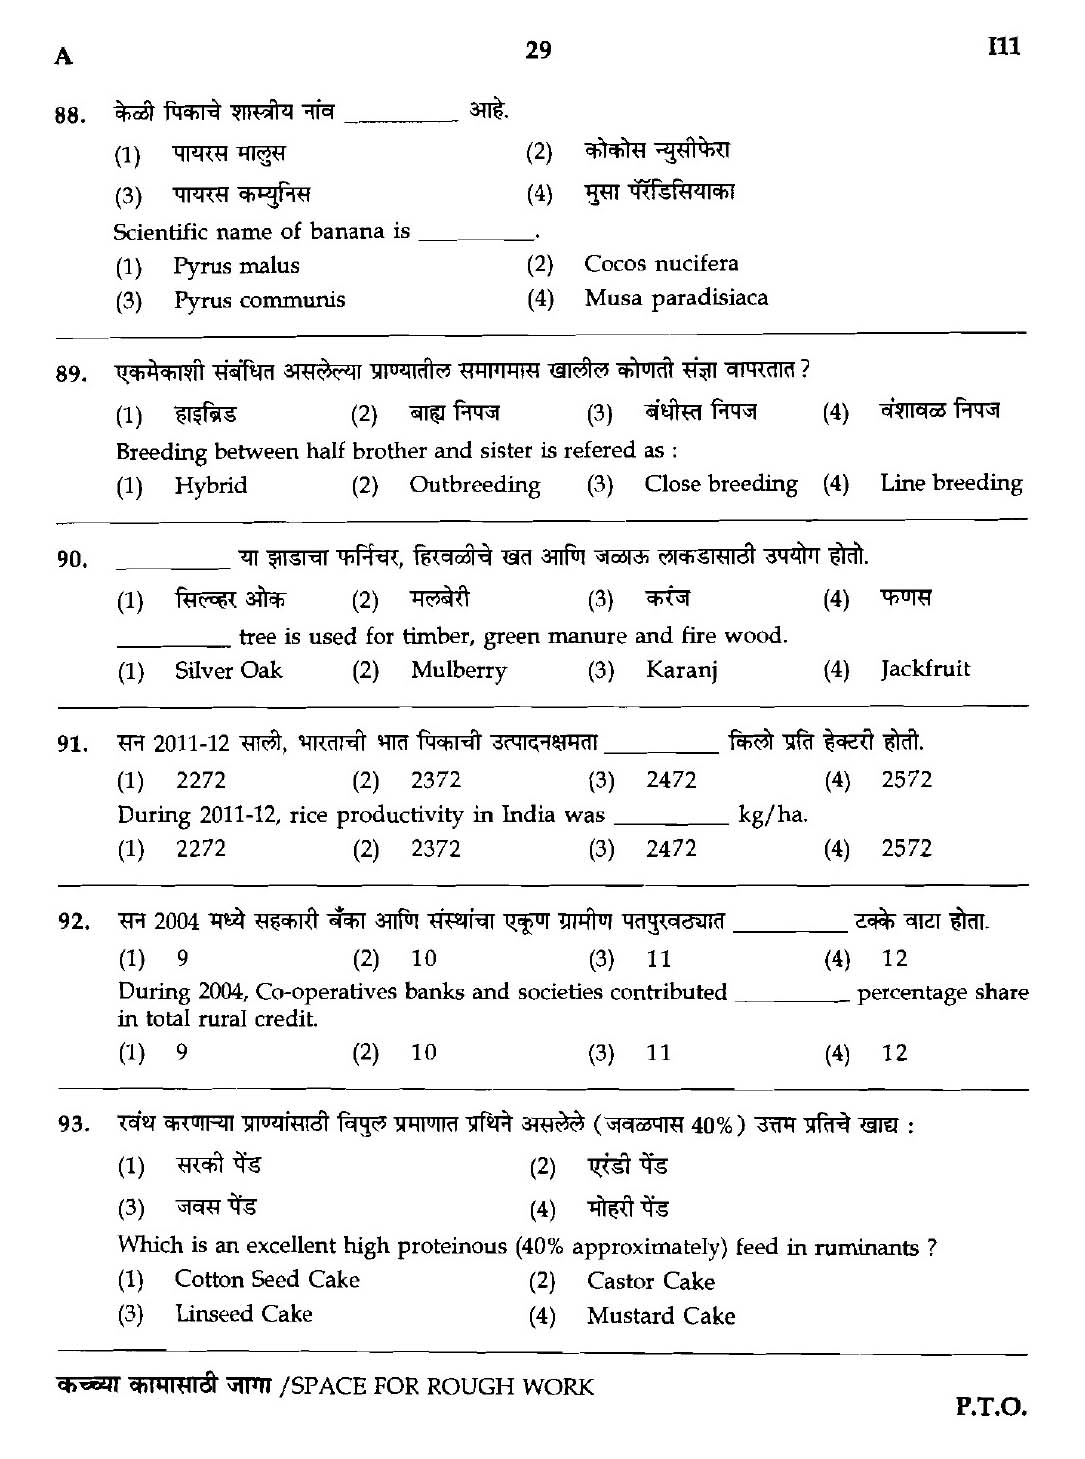 MPSC Agricultural Services Preliminary Exam 2018 Question Paper 28